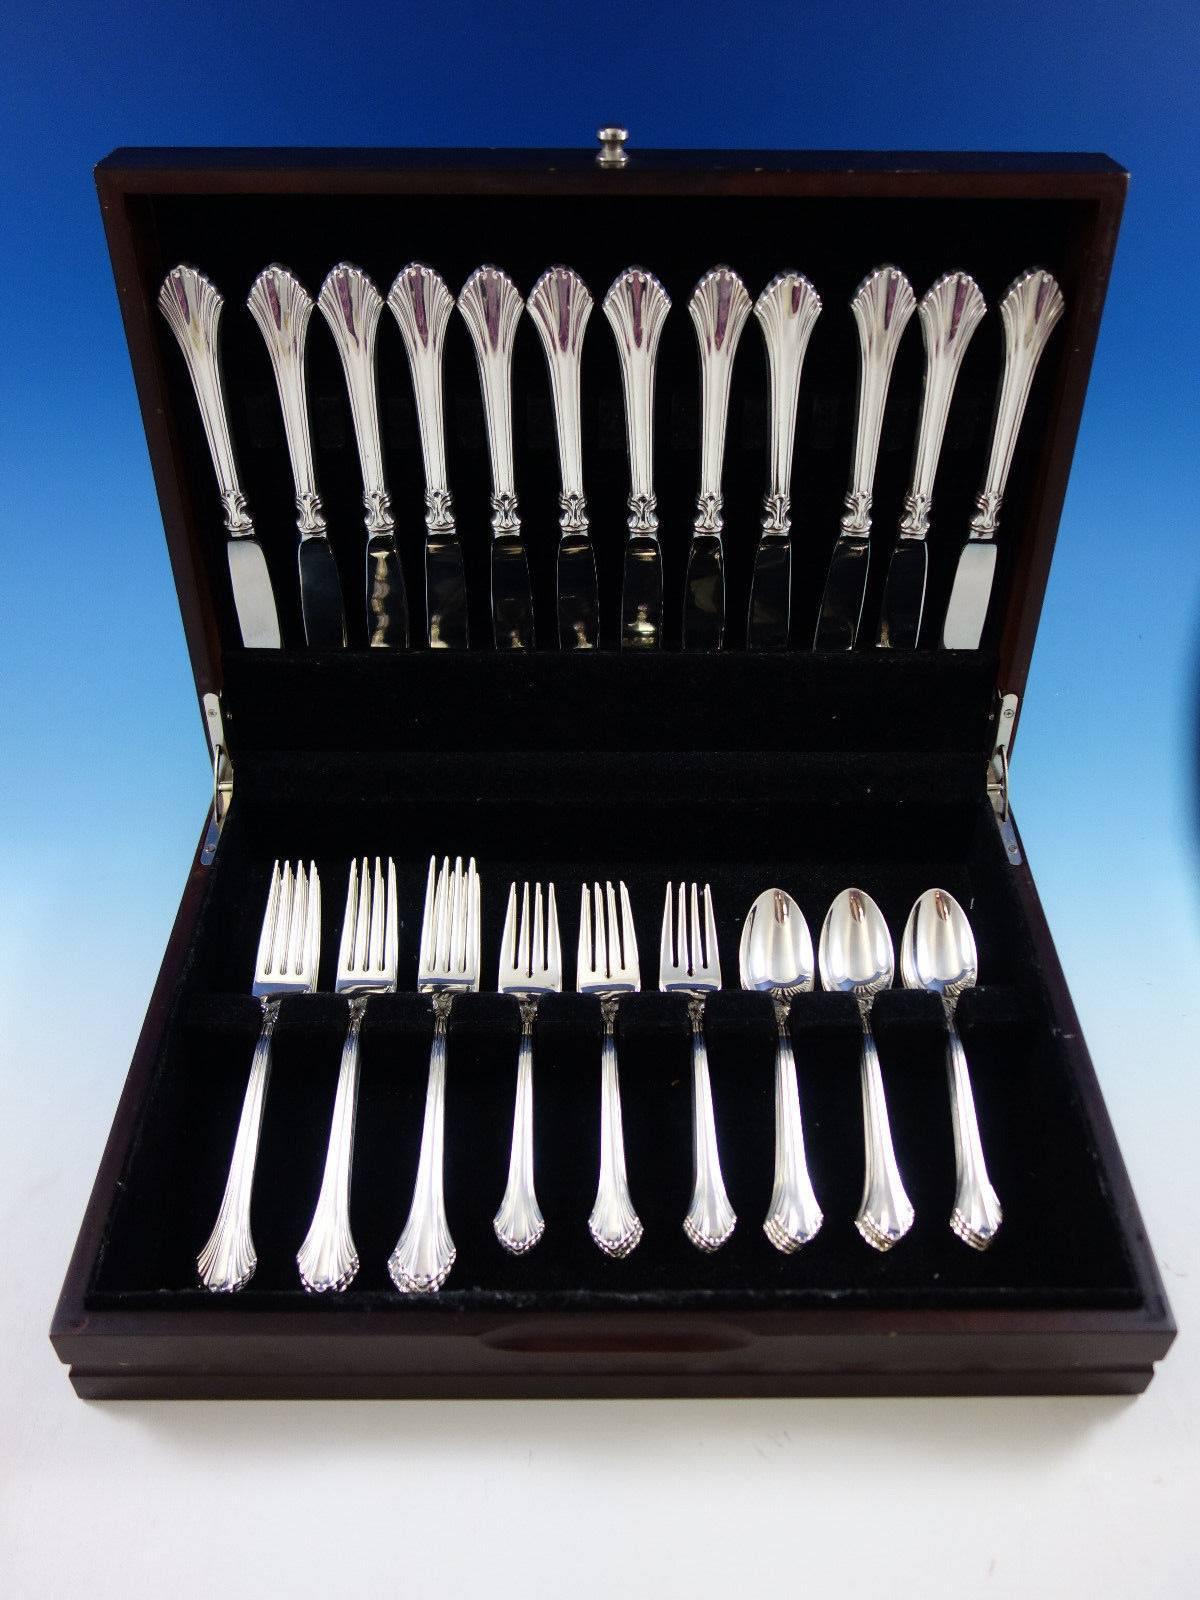 French Regency by Wallace sterling silver flatware set - 48 pieces. This set includes: 

12 knives, 9